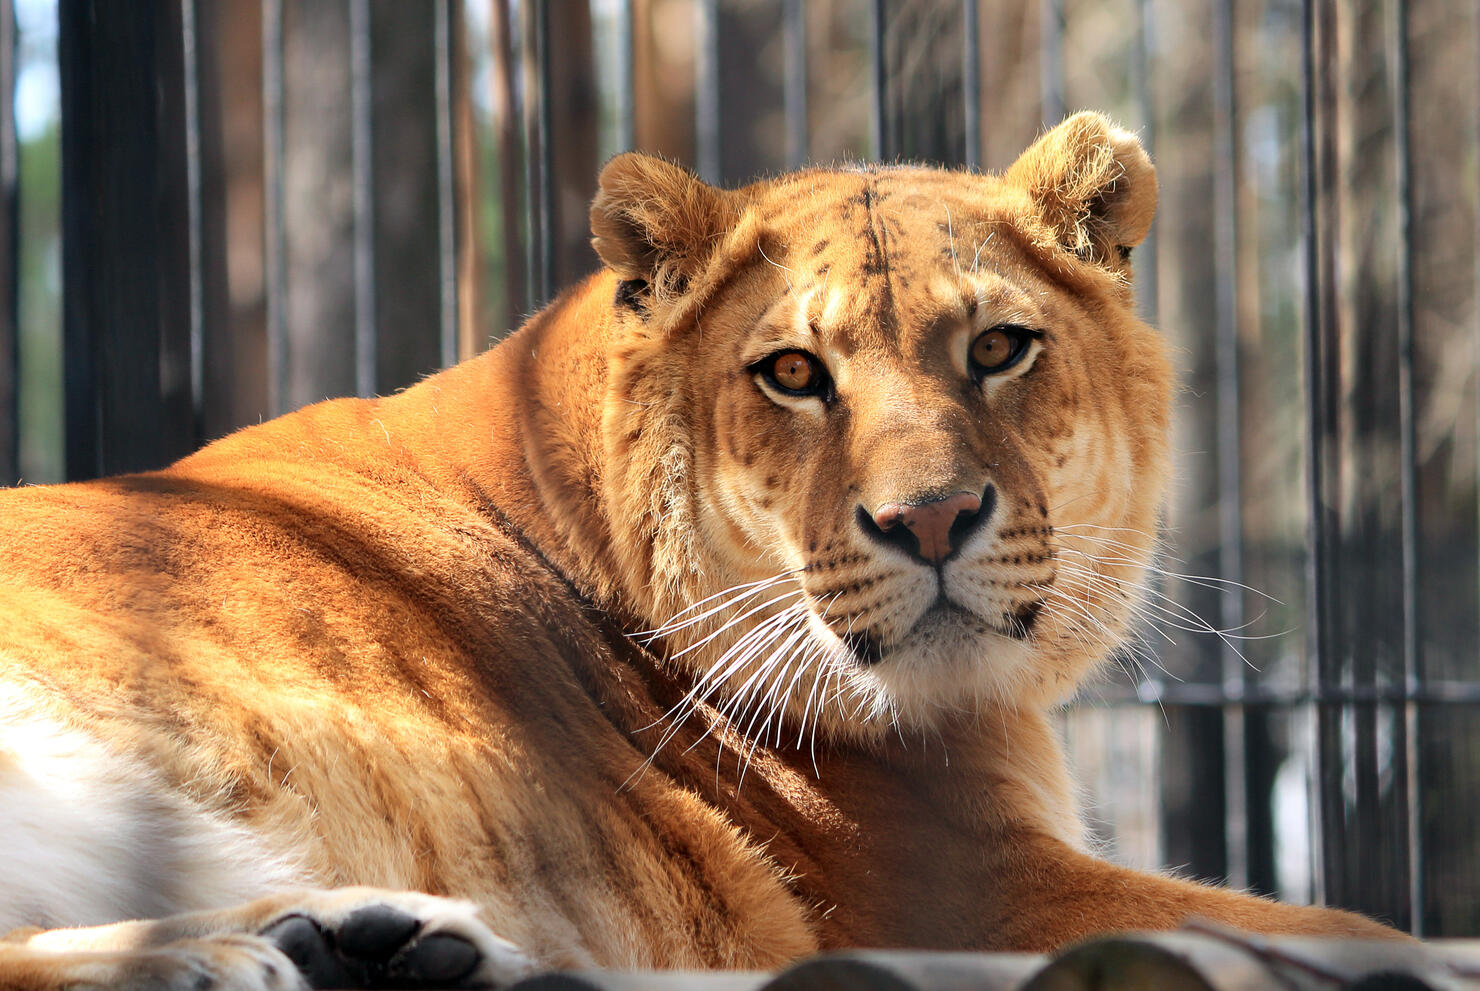 Eight Hybrid Big Cats Seized From Tiger King Park In Oklahoma | iHeart